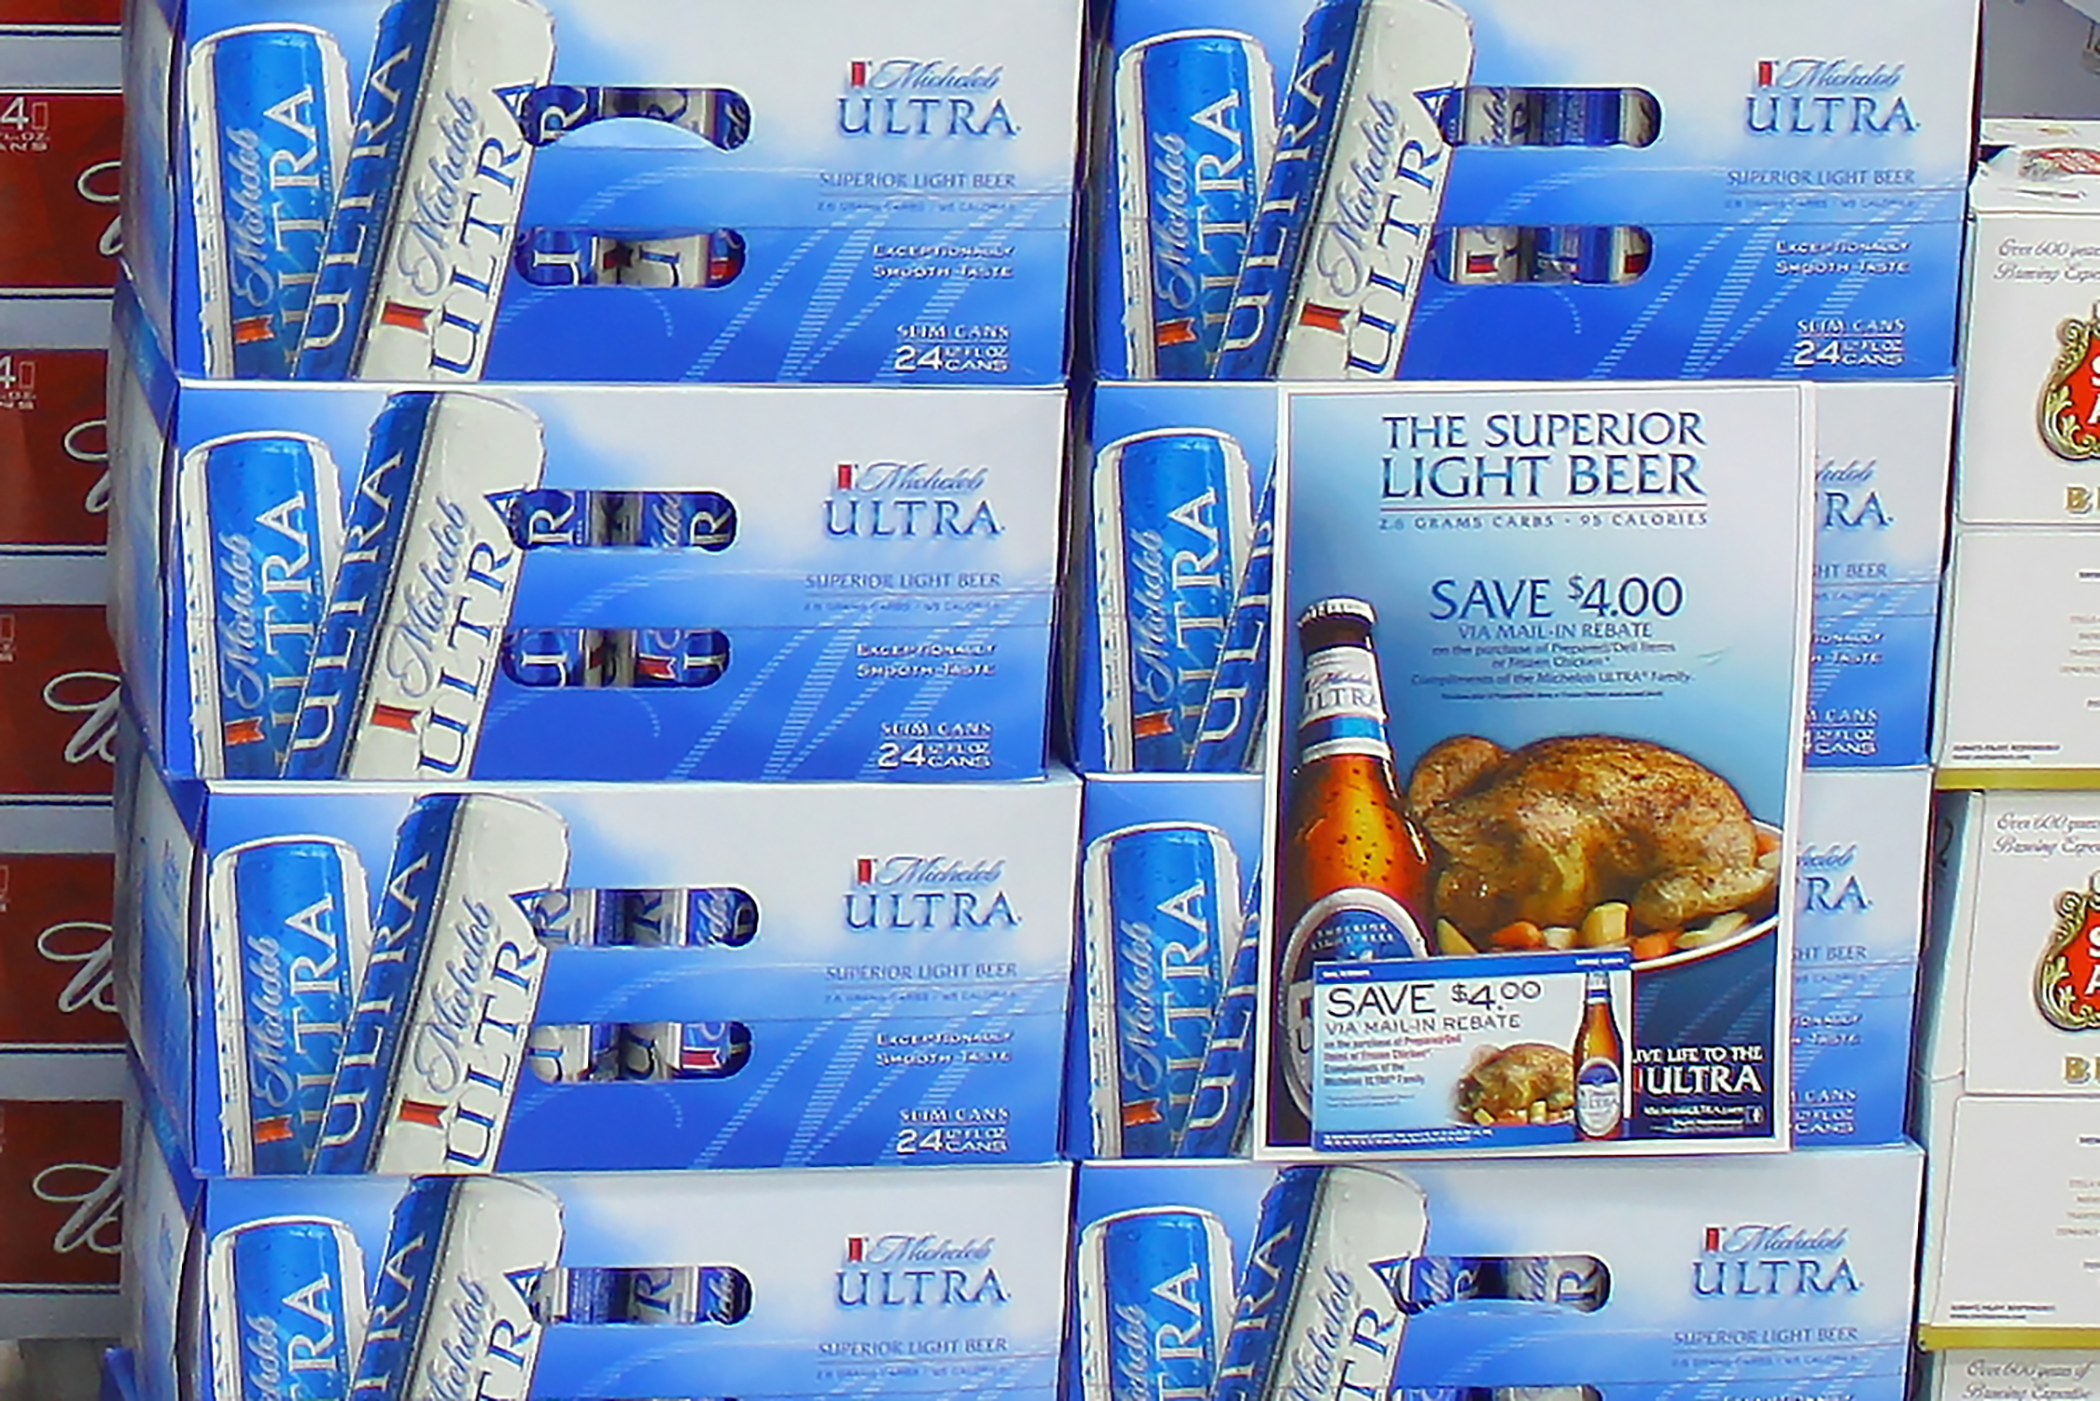 A stacked pallet of Michelob Beer, Michelob is a 5% abv pale lager developed by Adolphus Busch in 1896 as a draught beer for connoisseurs. Brewed by Anheuser-Busch